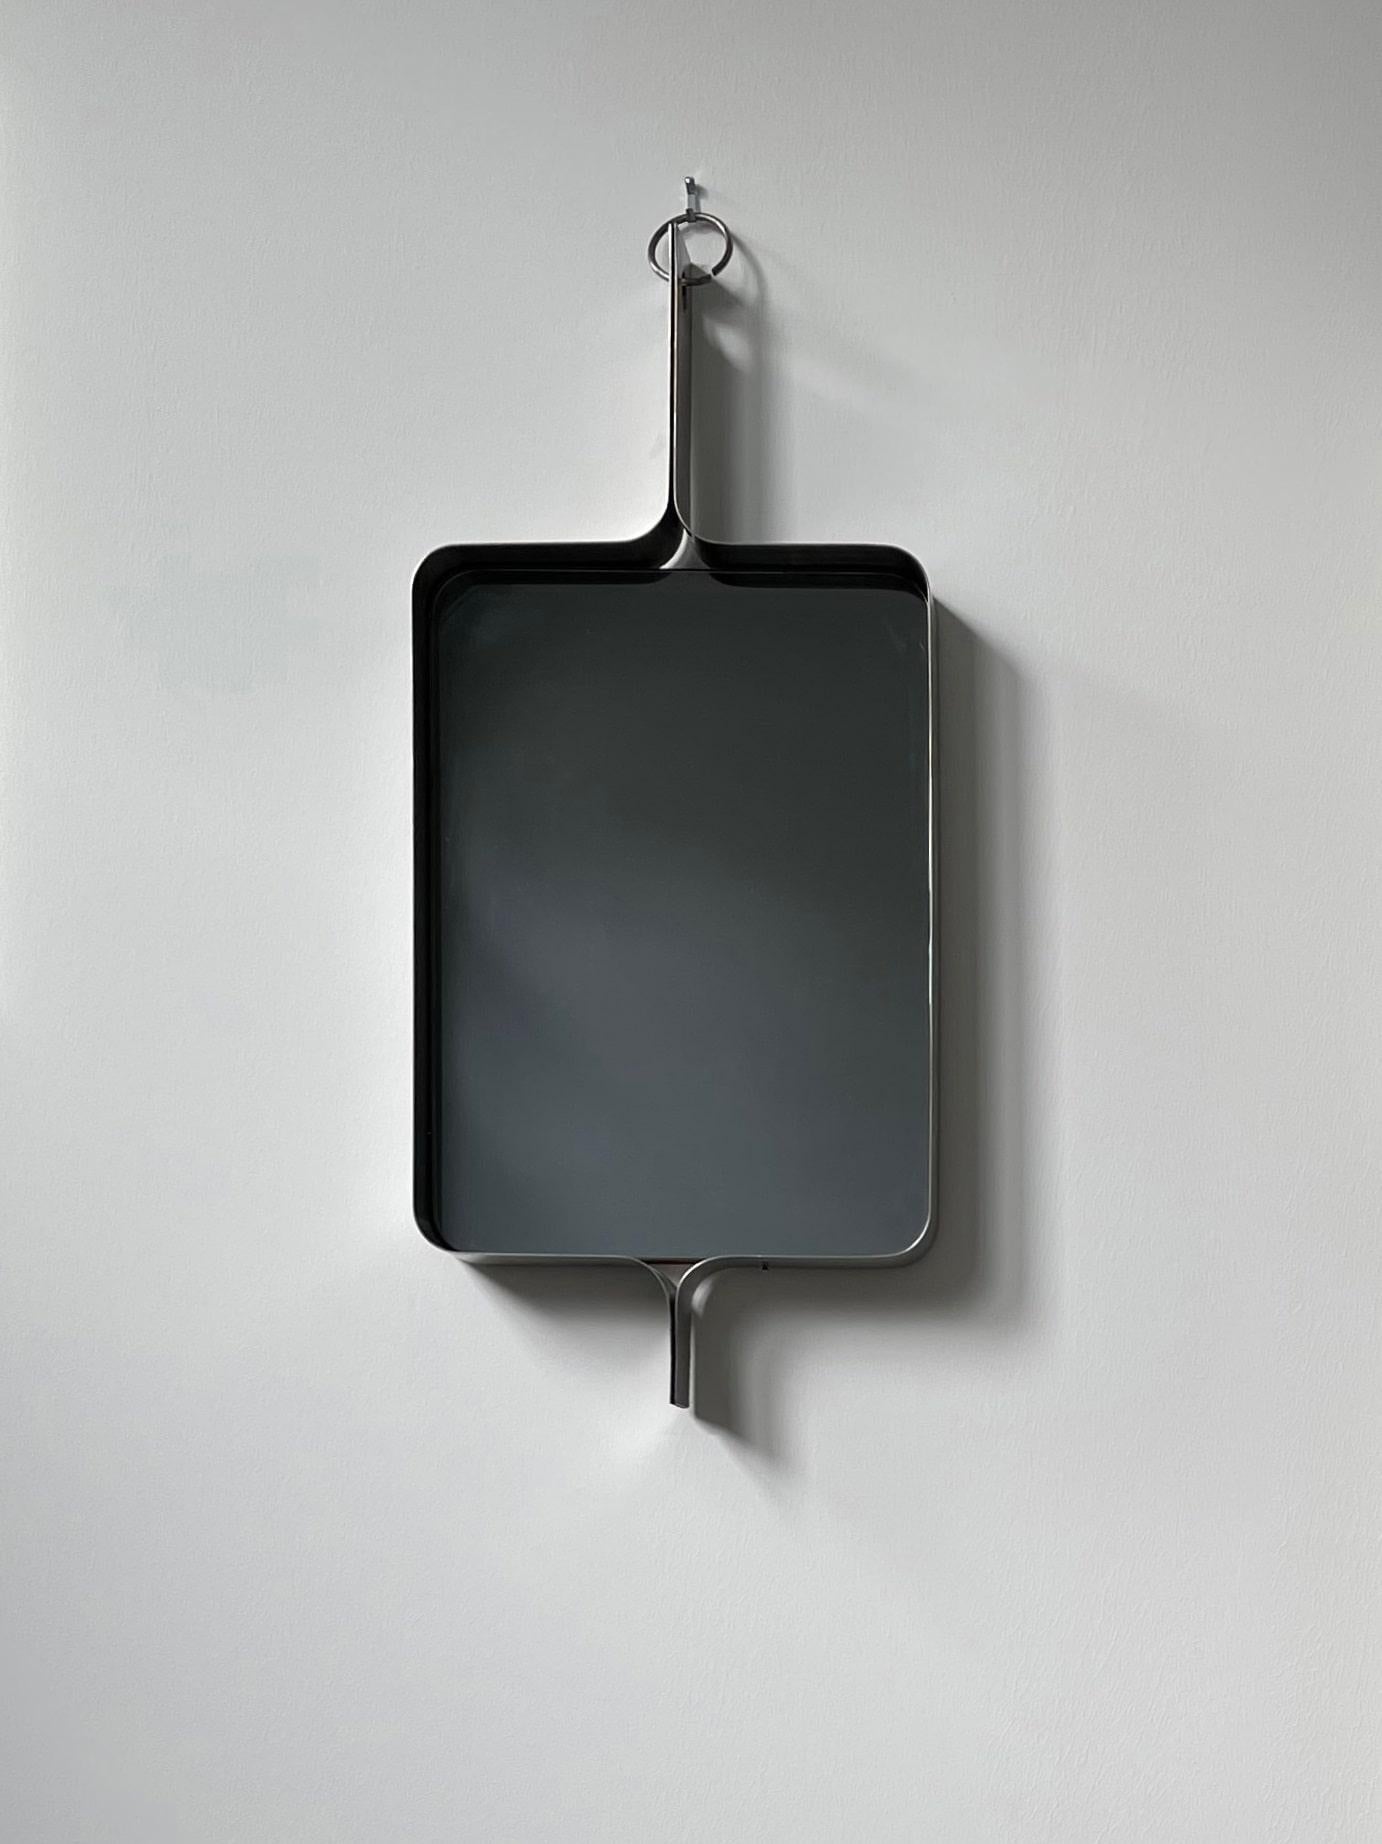 French Xavier Féal Stainless Steel Smoked Mirror For Sale